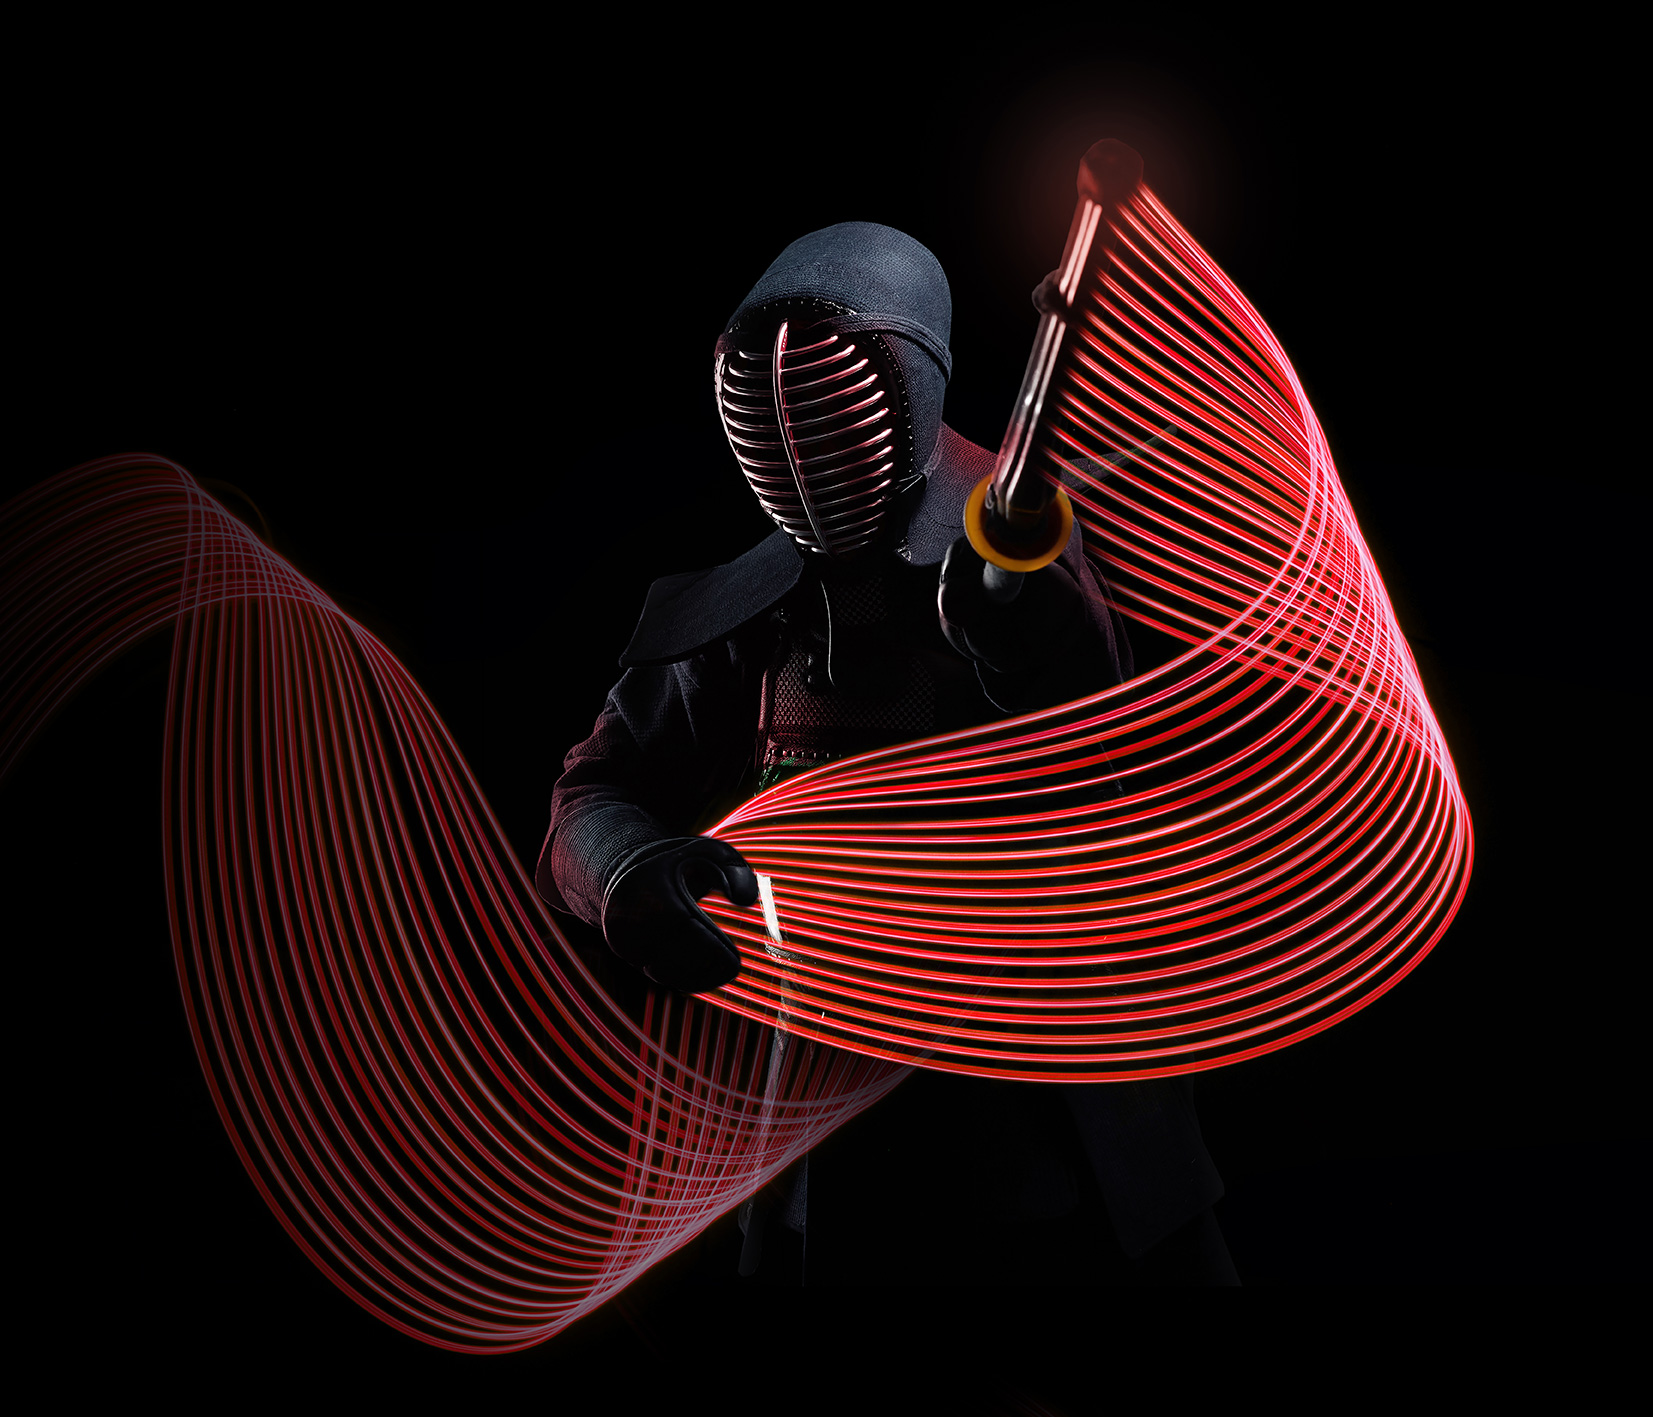 Image of a kenshi with his light sword